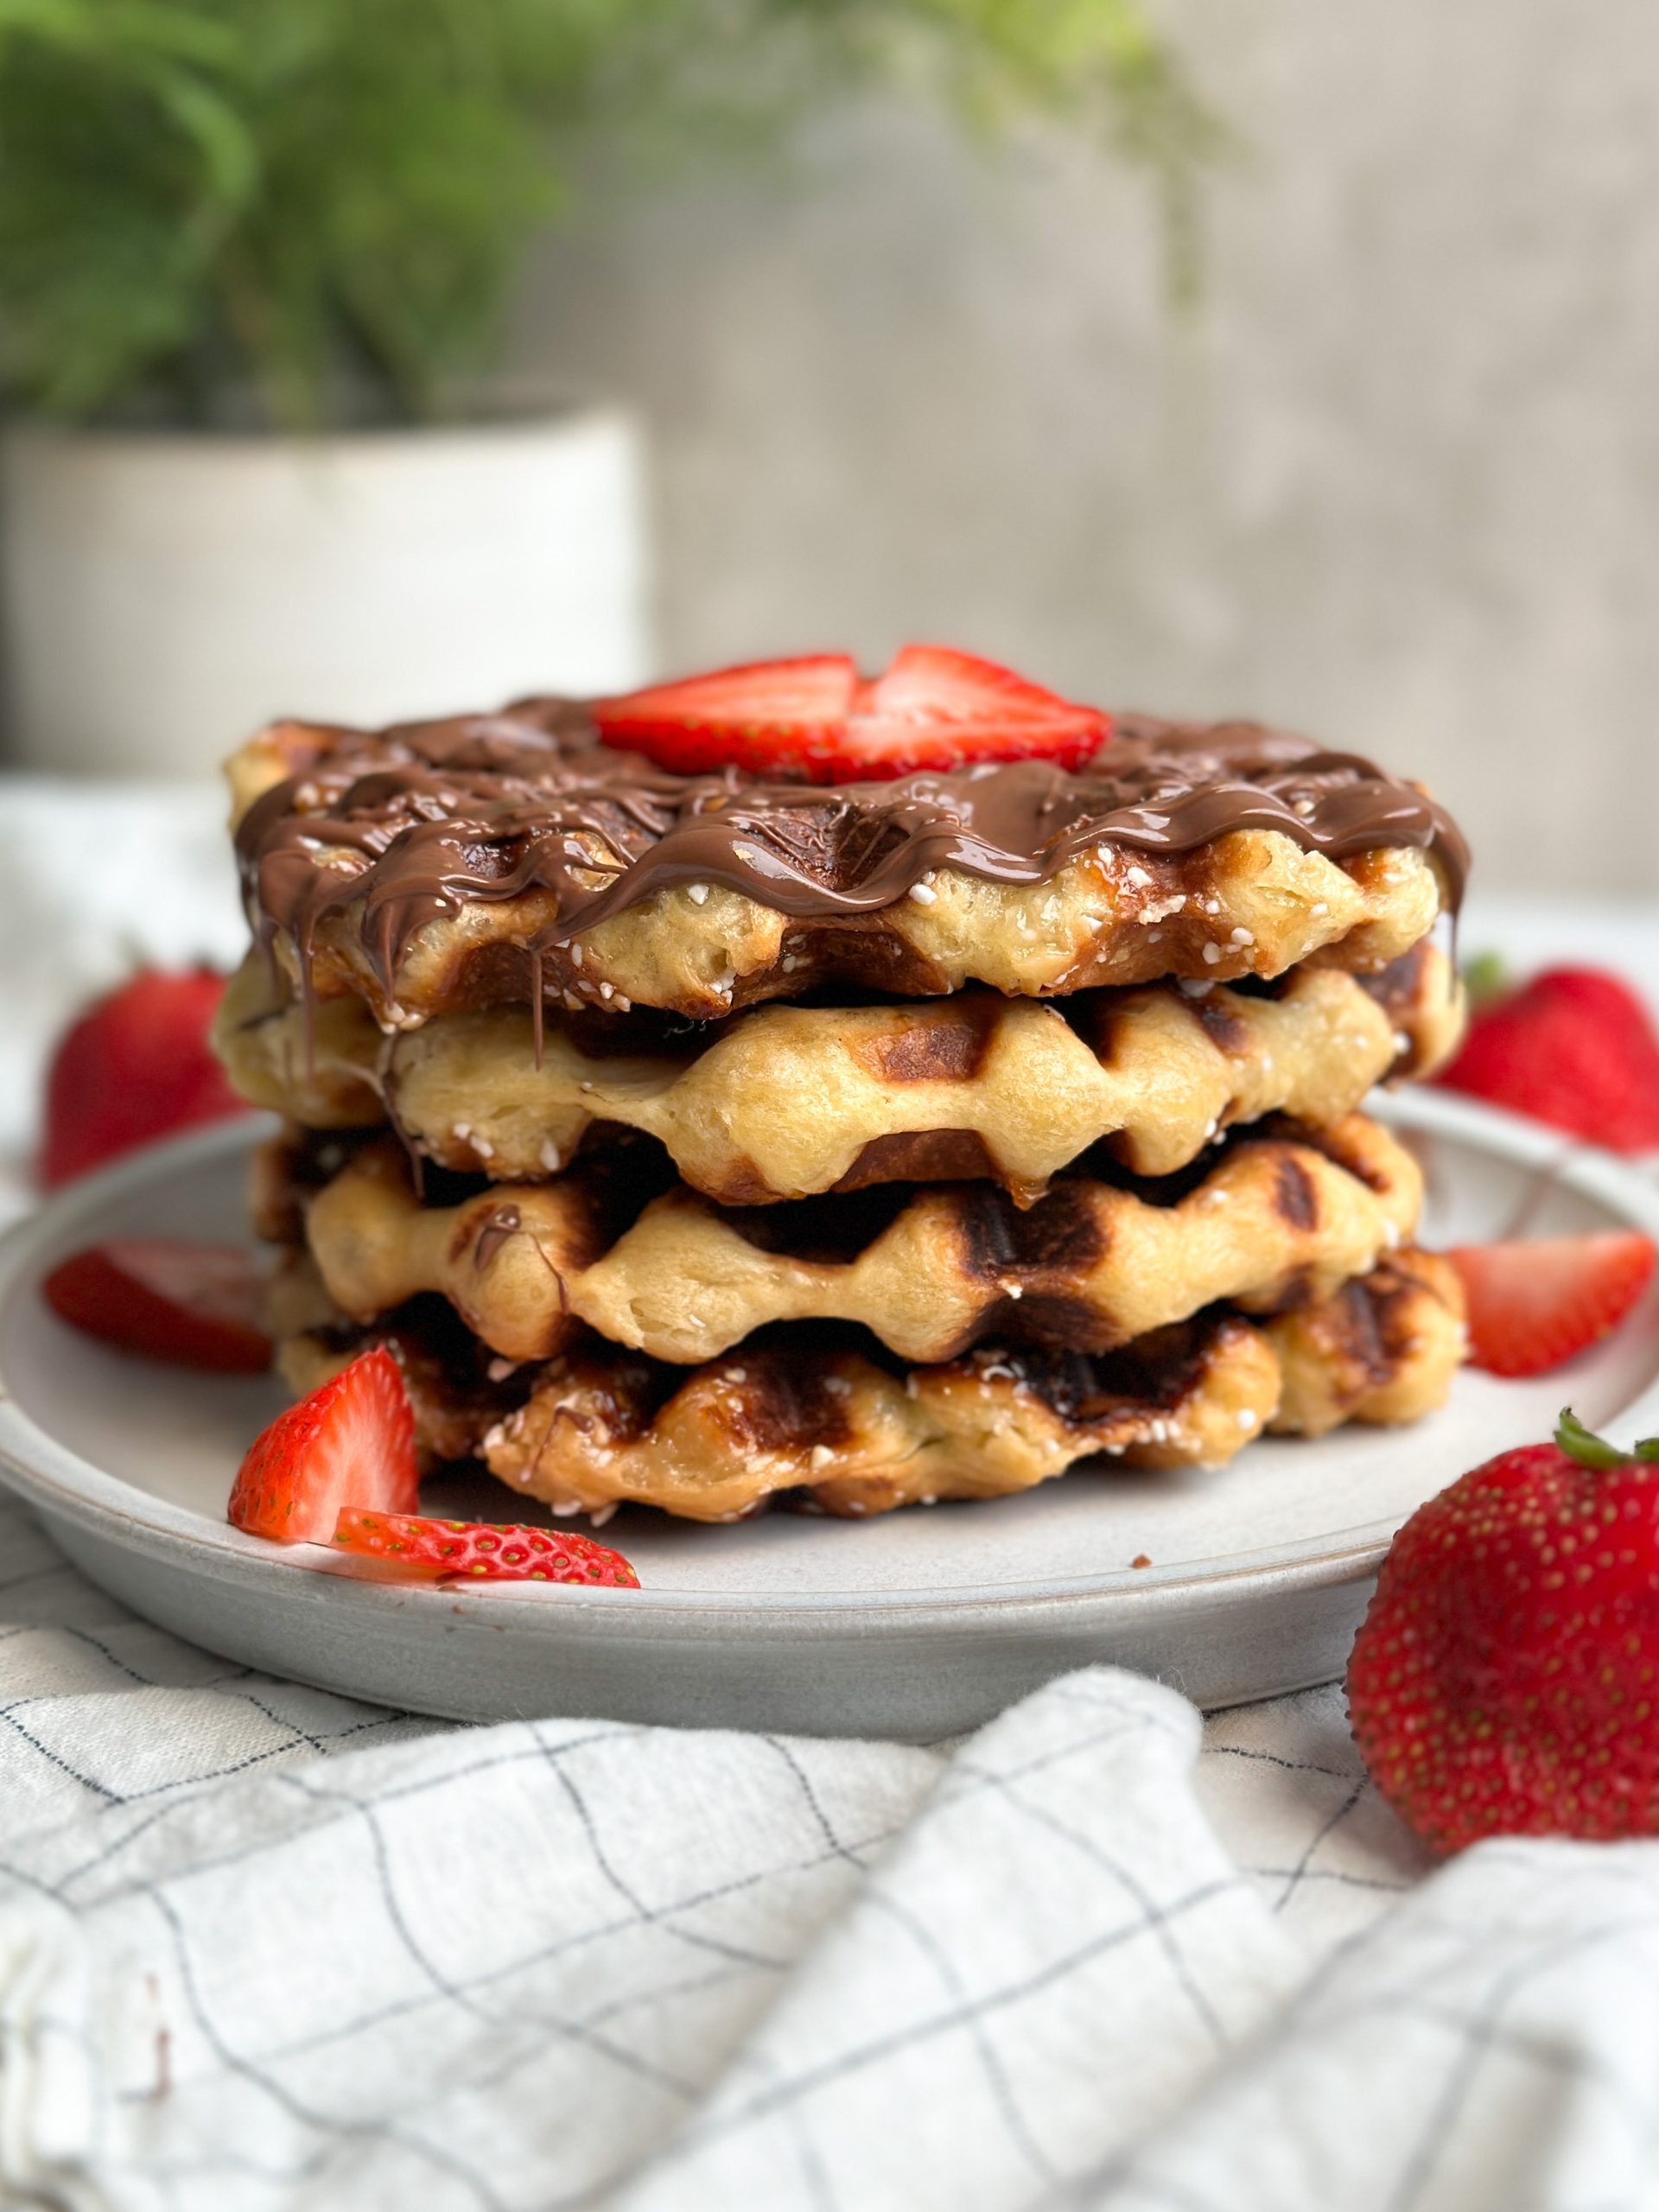 Side image of 4 Belgian liege waffles stacked on a plate, drizzled with Nutella and covered with chopped strawberries